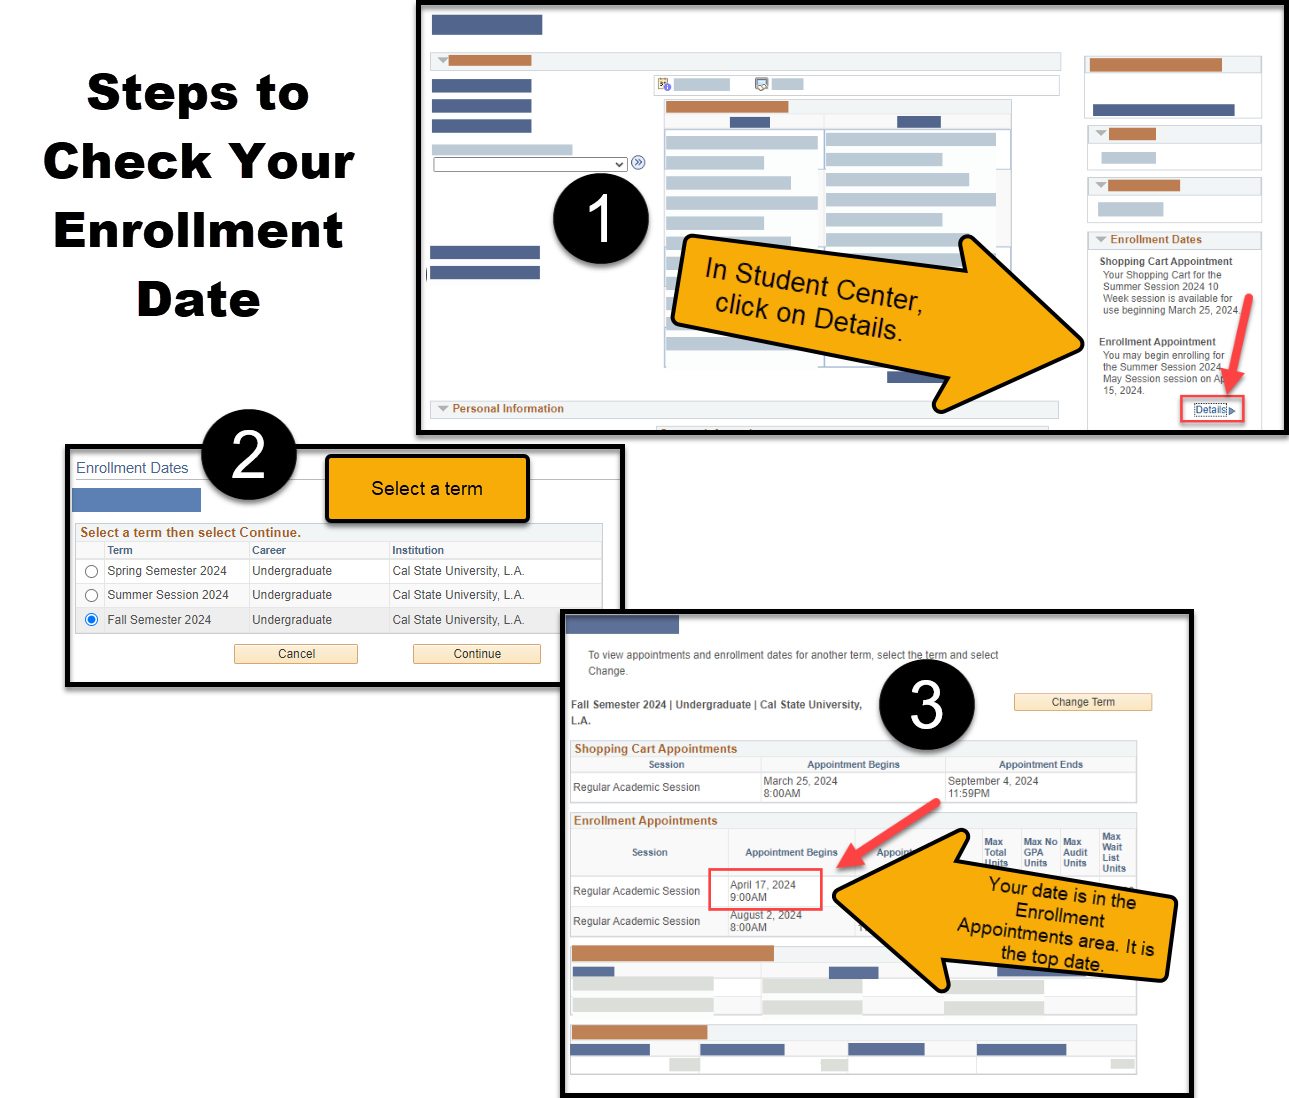 How to check your enrollment date with steps. Step one, arrow points to details.